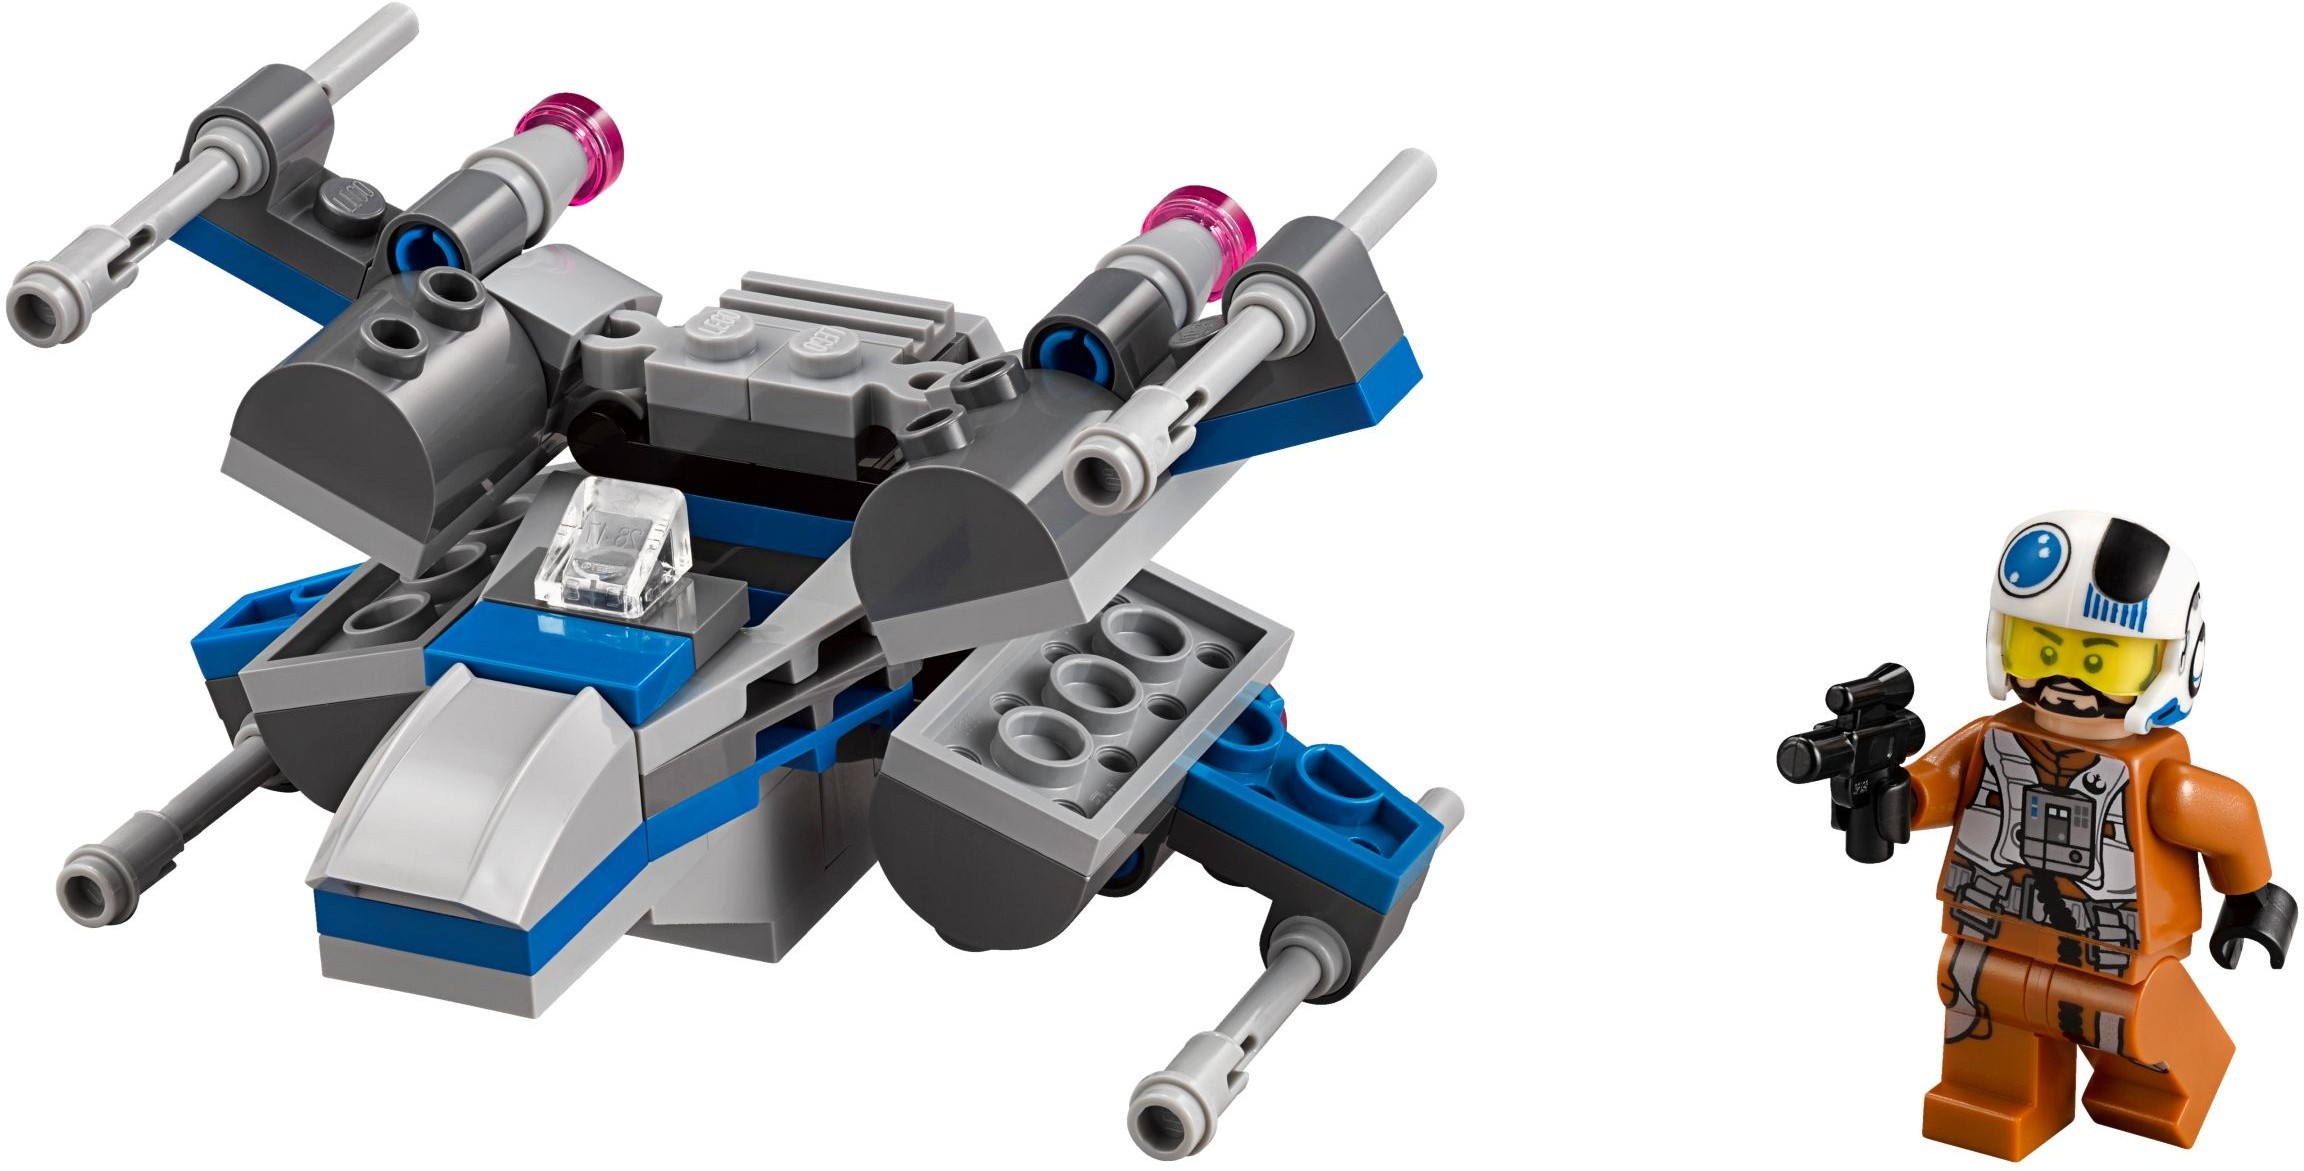 lego microfighters series 5